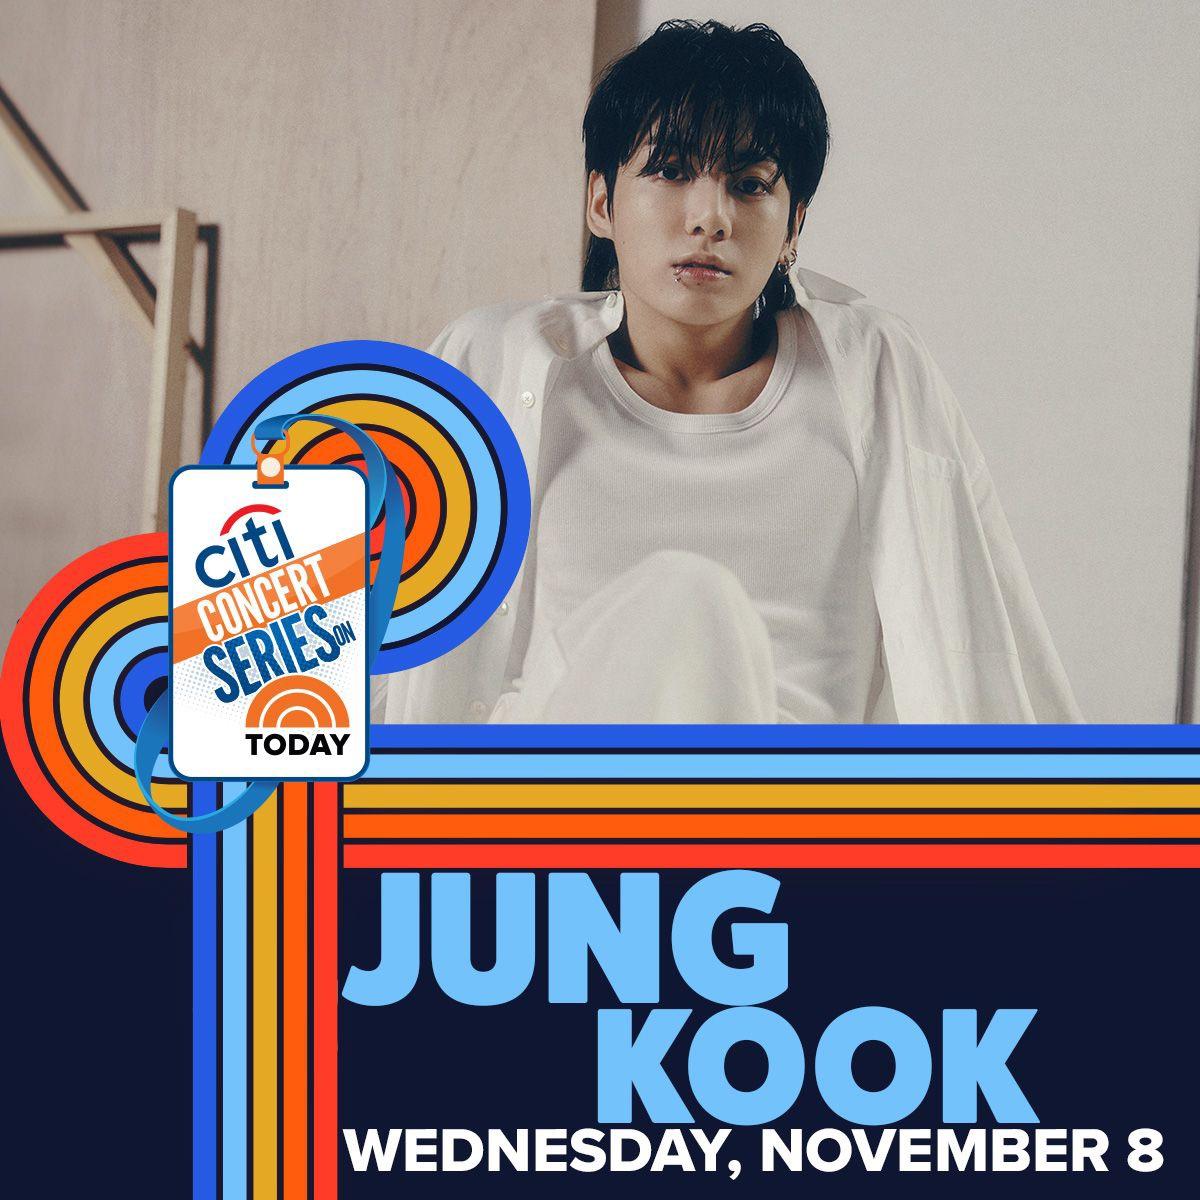 Jungkook will be performing live in New York City as part of the Citi Concert Series on 8 Nov - 011123